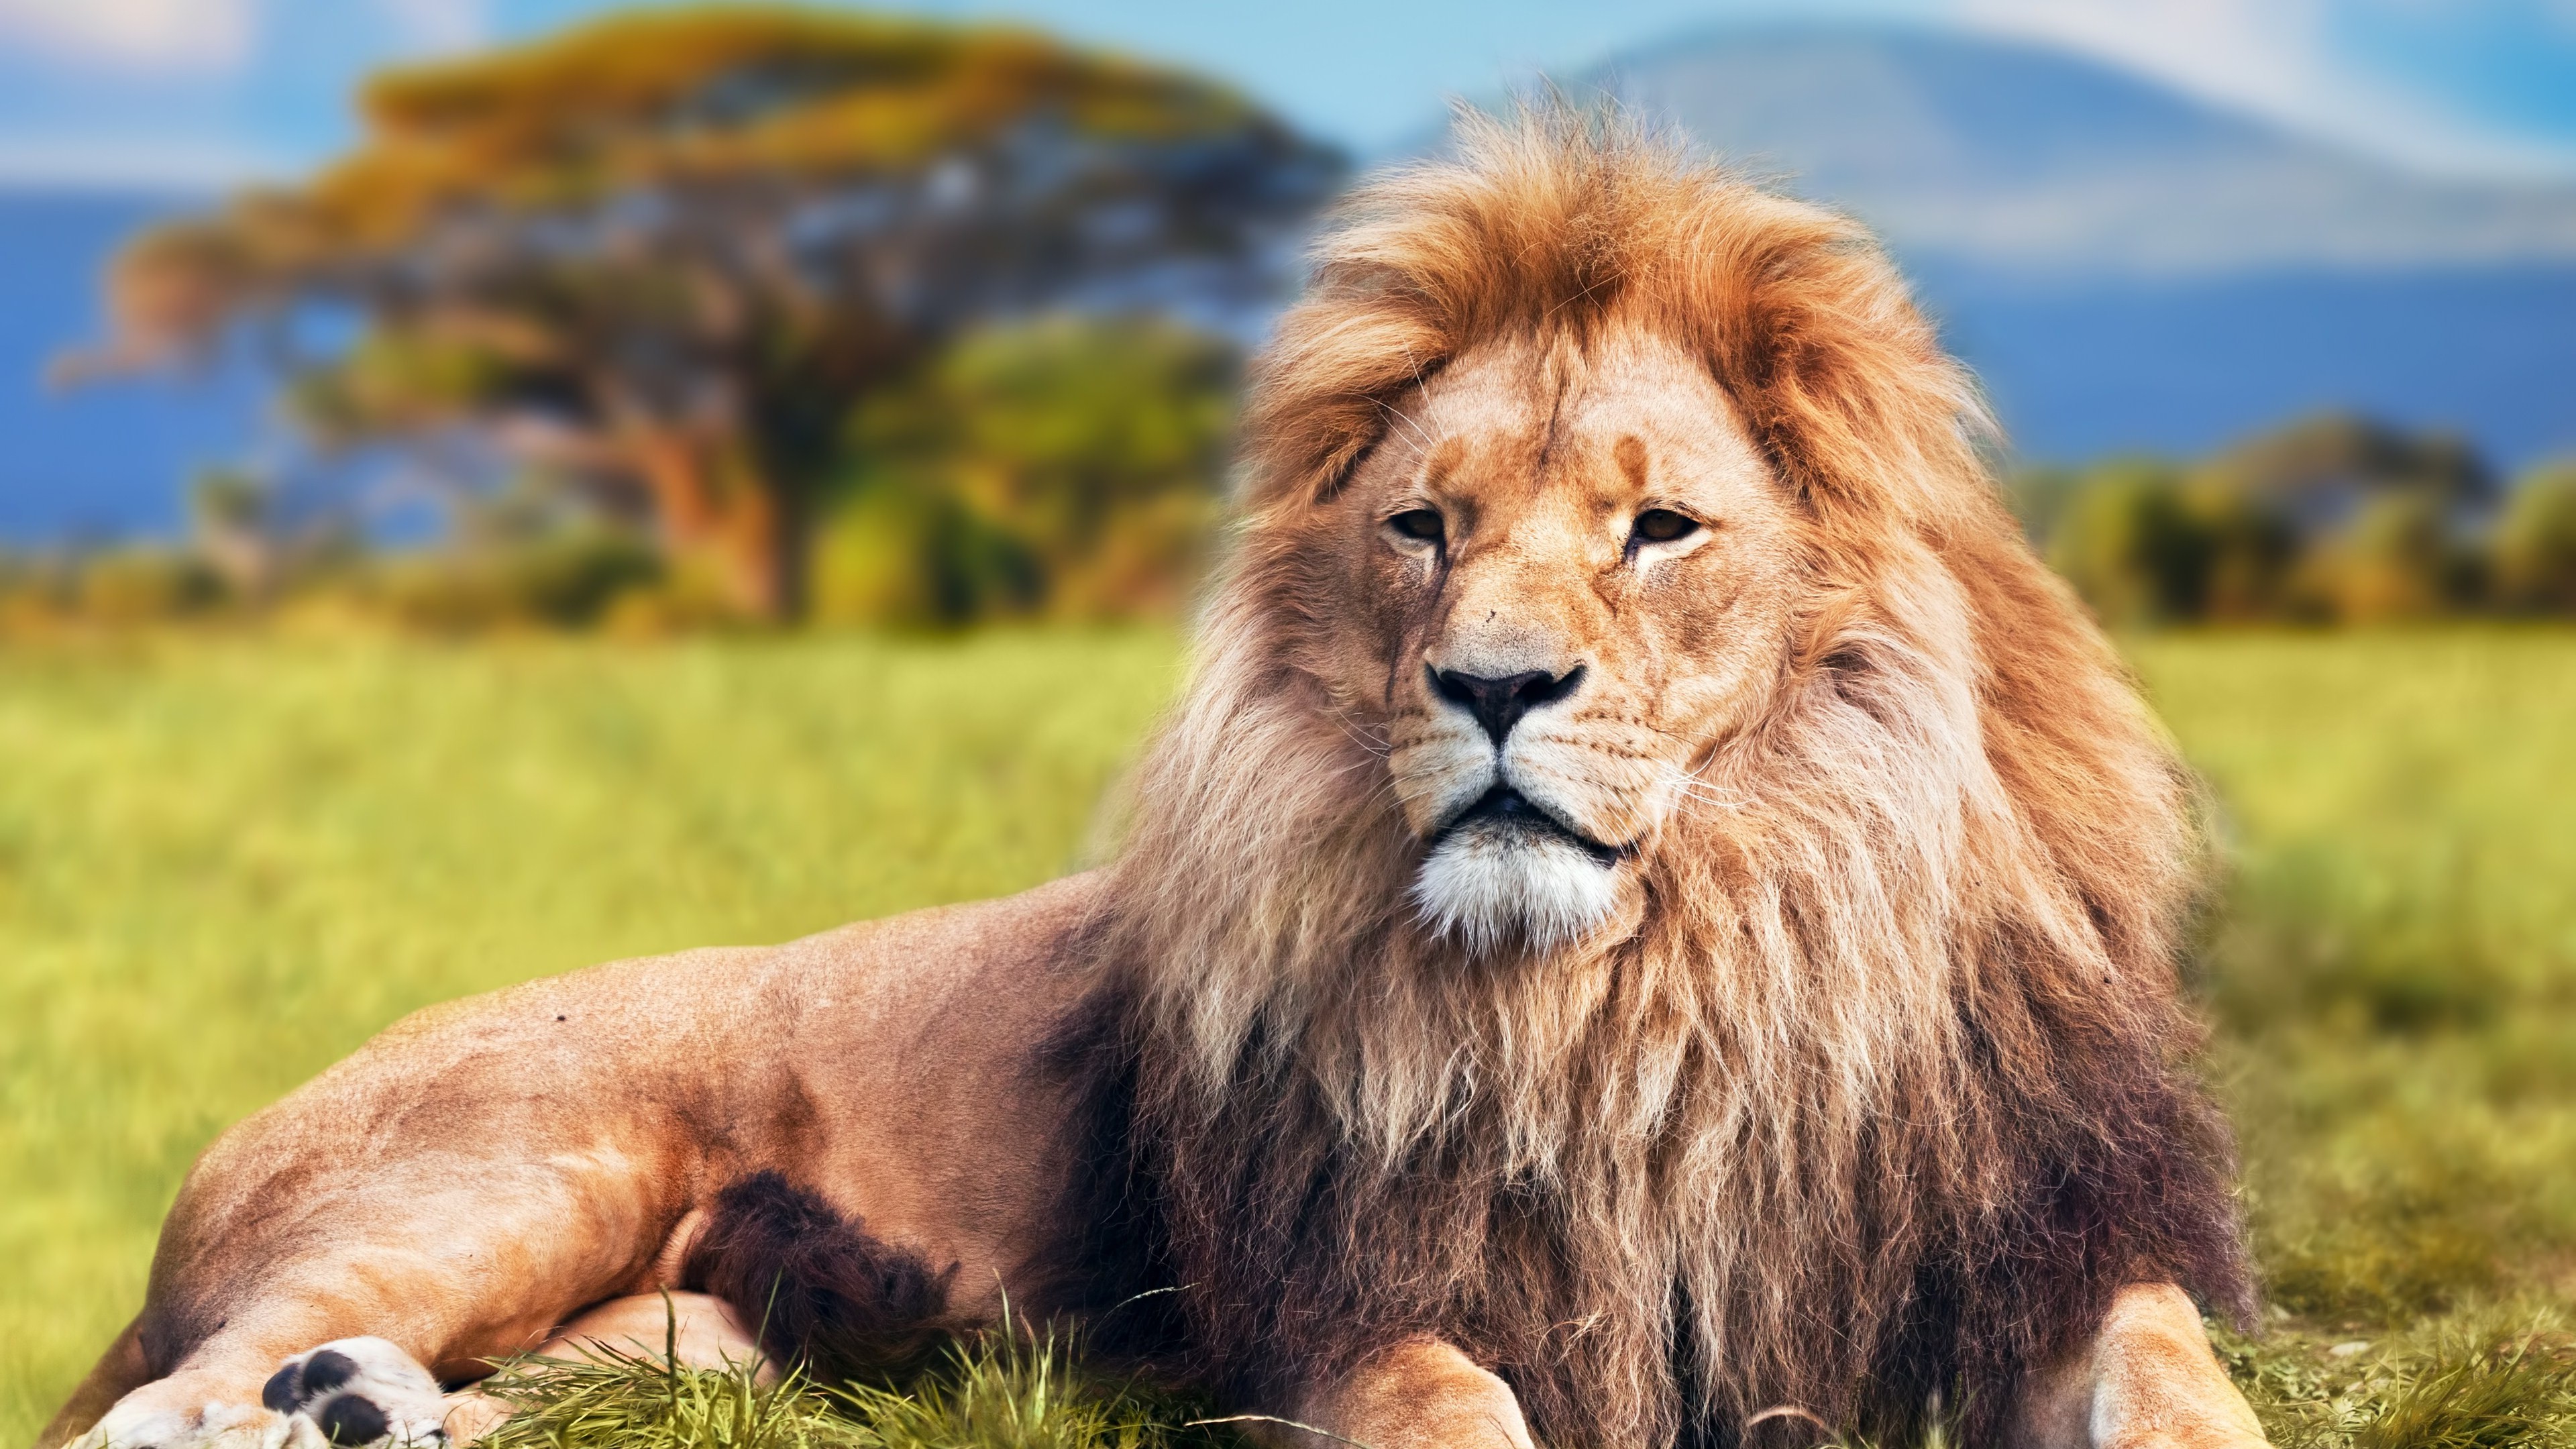 lion-animals-wallpapers-hd-desktop-and-mobile-backgrounds